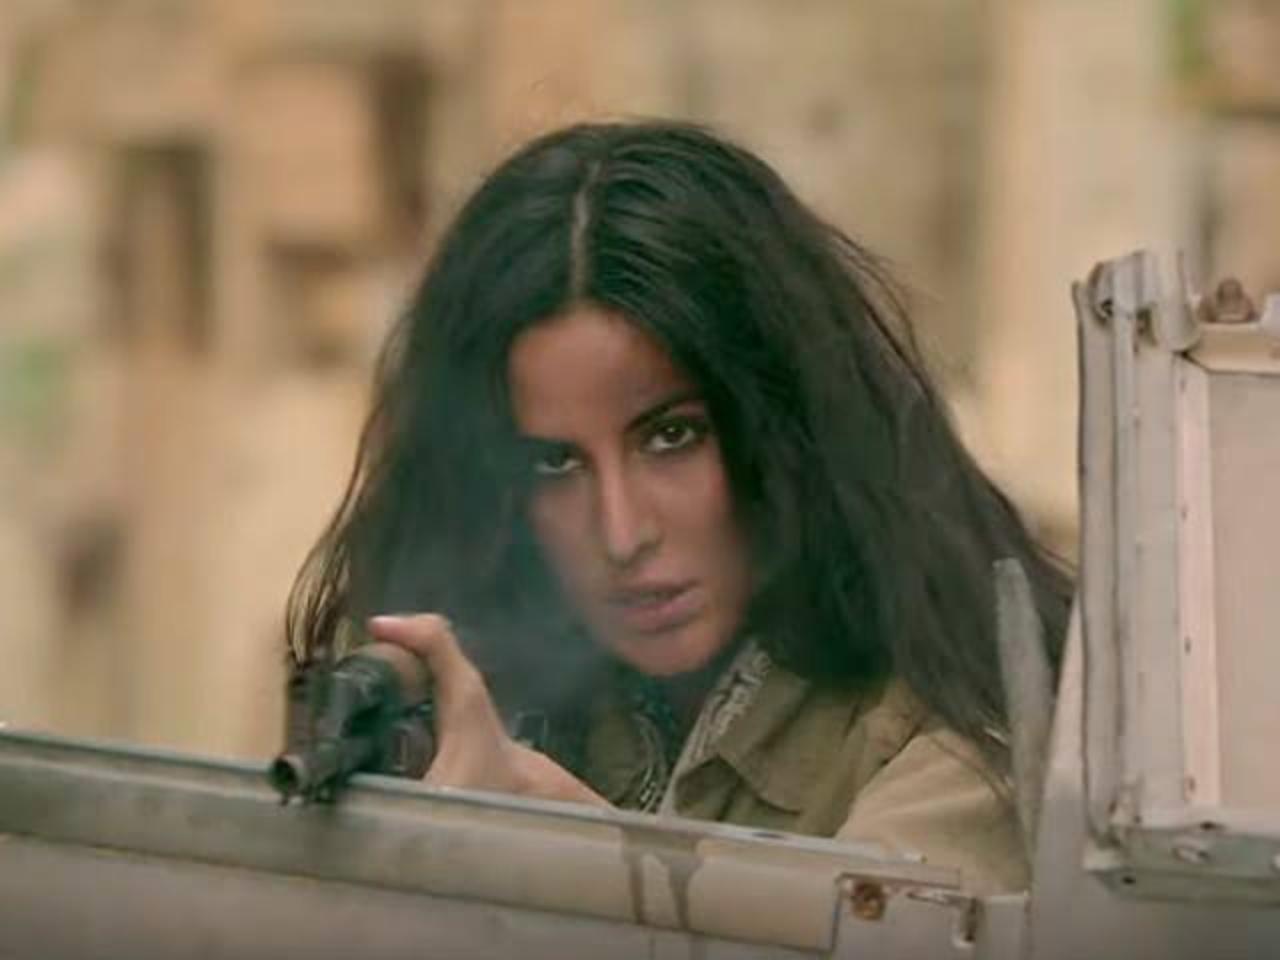 Katrina Kaif
Katrina was seen in action packed mode in Kabir Khan's 'Ek tha Tiger' as well as Ali Abbas Zafar's 'Tiger Zinda Hai'. The actress was seen doing some difficult action sequences and nailing them and how